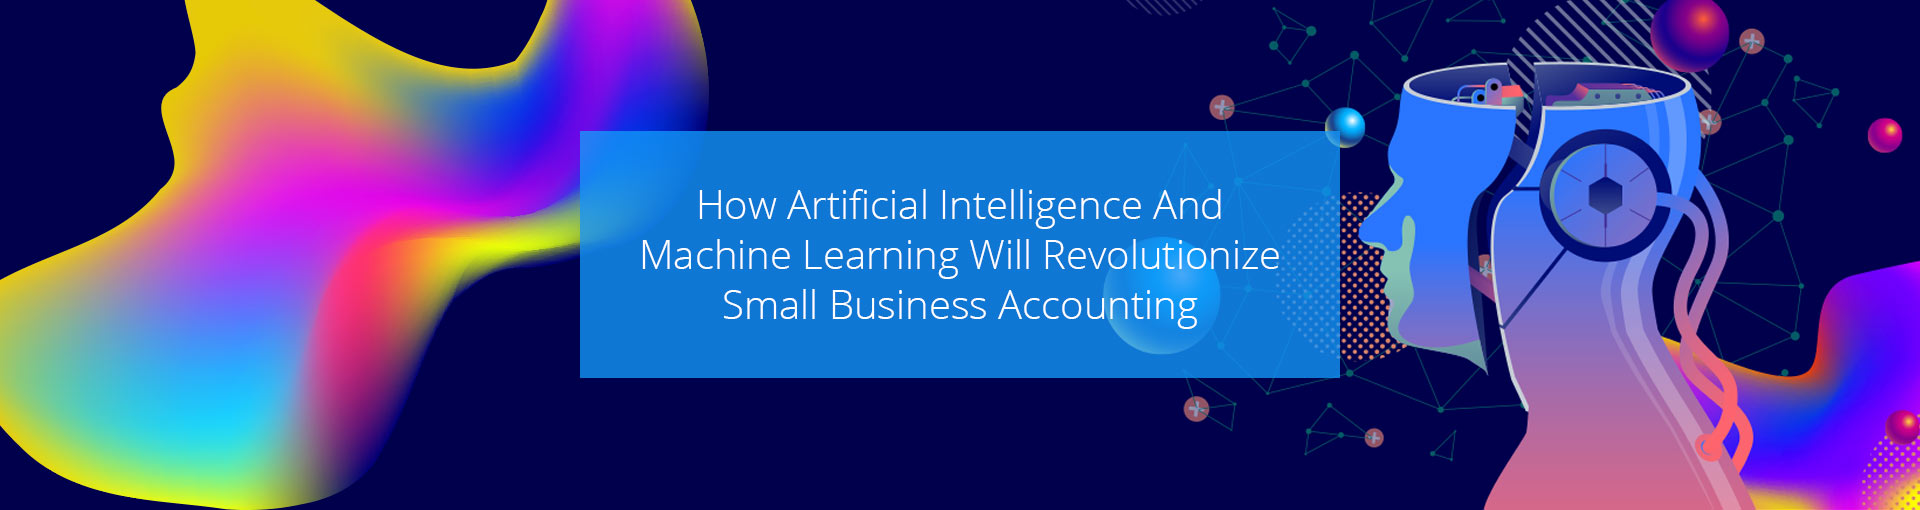 How Artificial Intelligence And Machine Learning Will Revolutionize Small Business Accounting